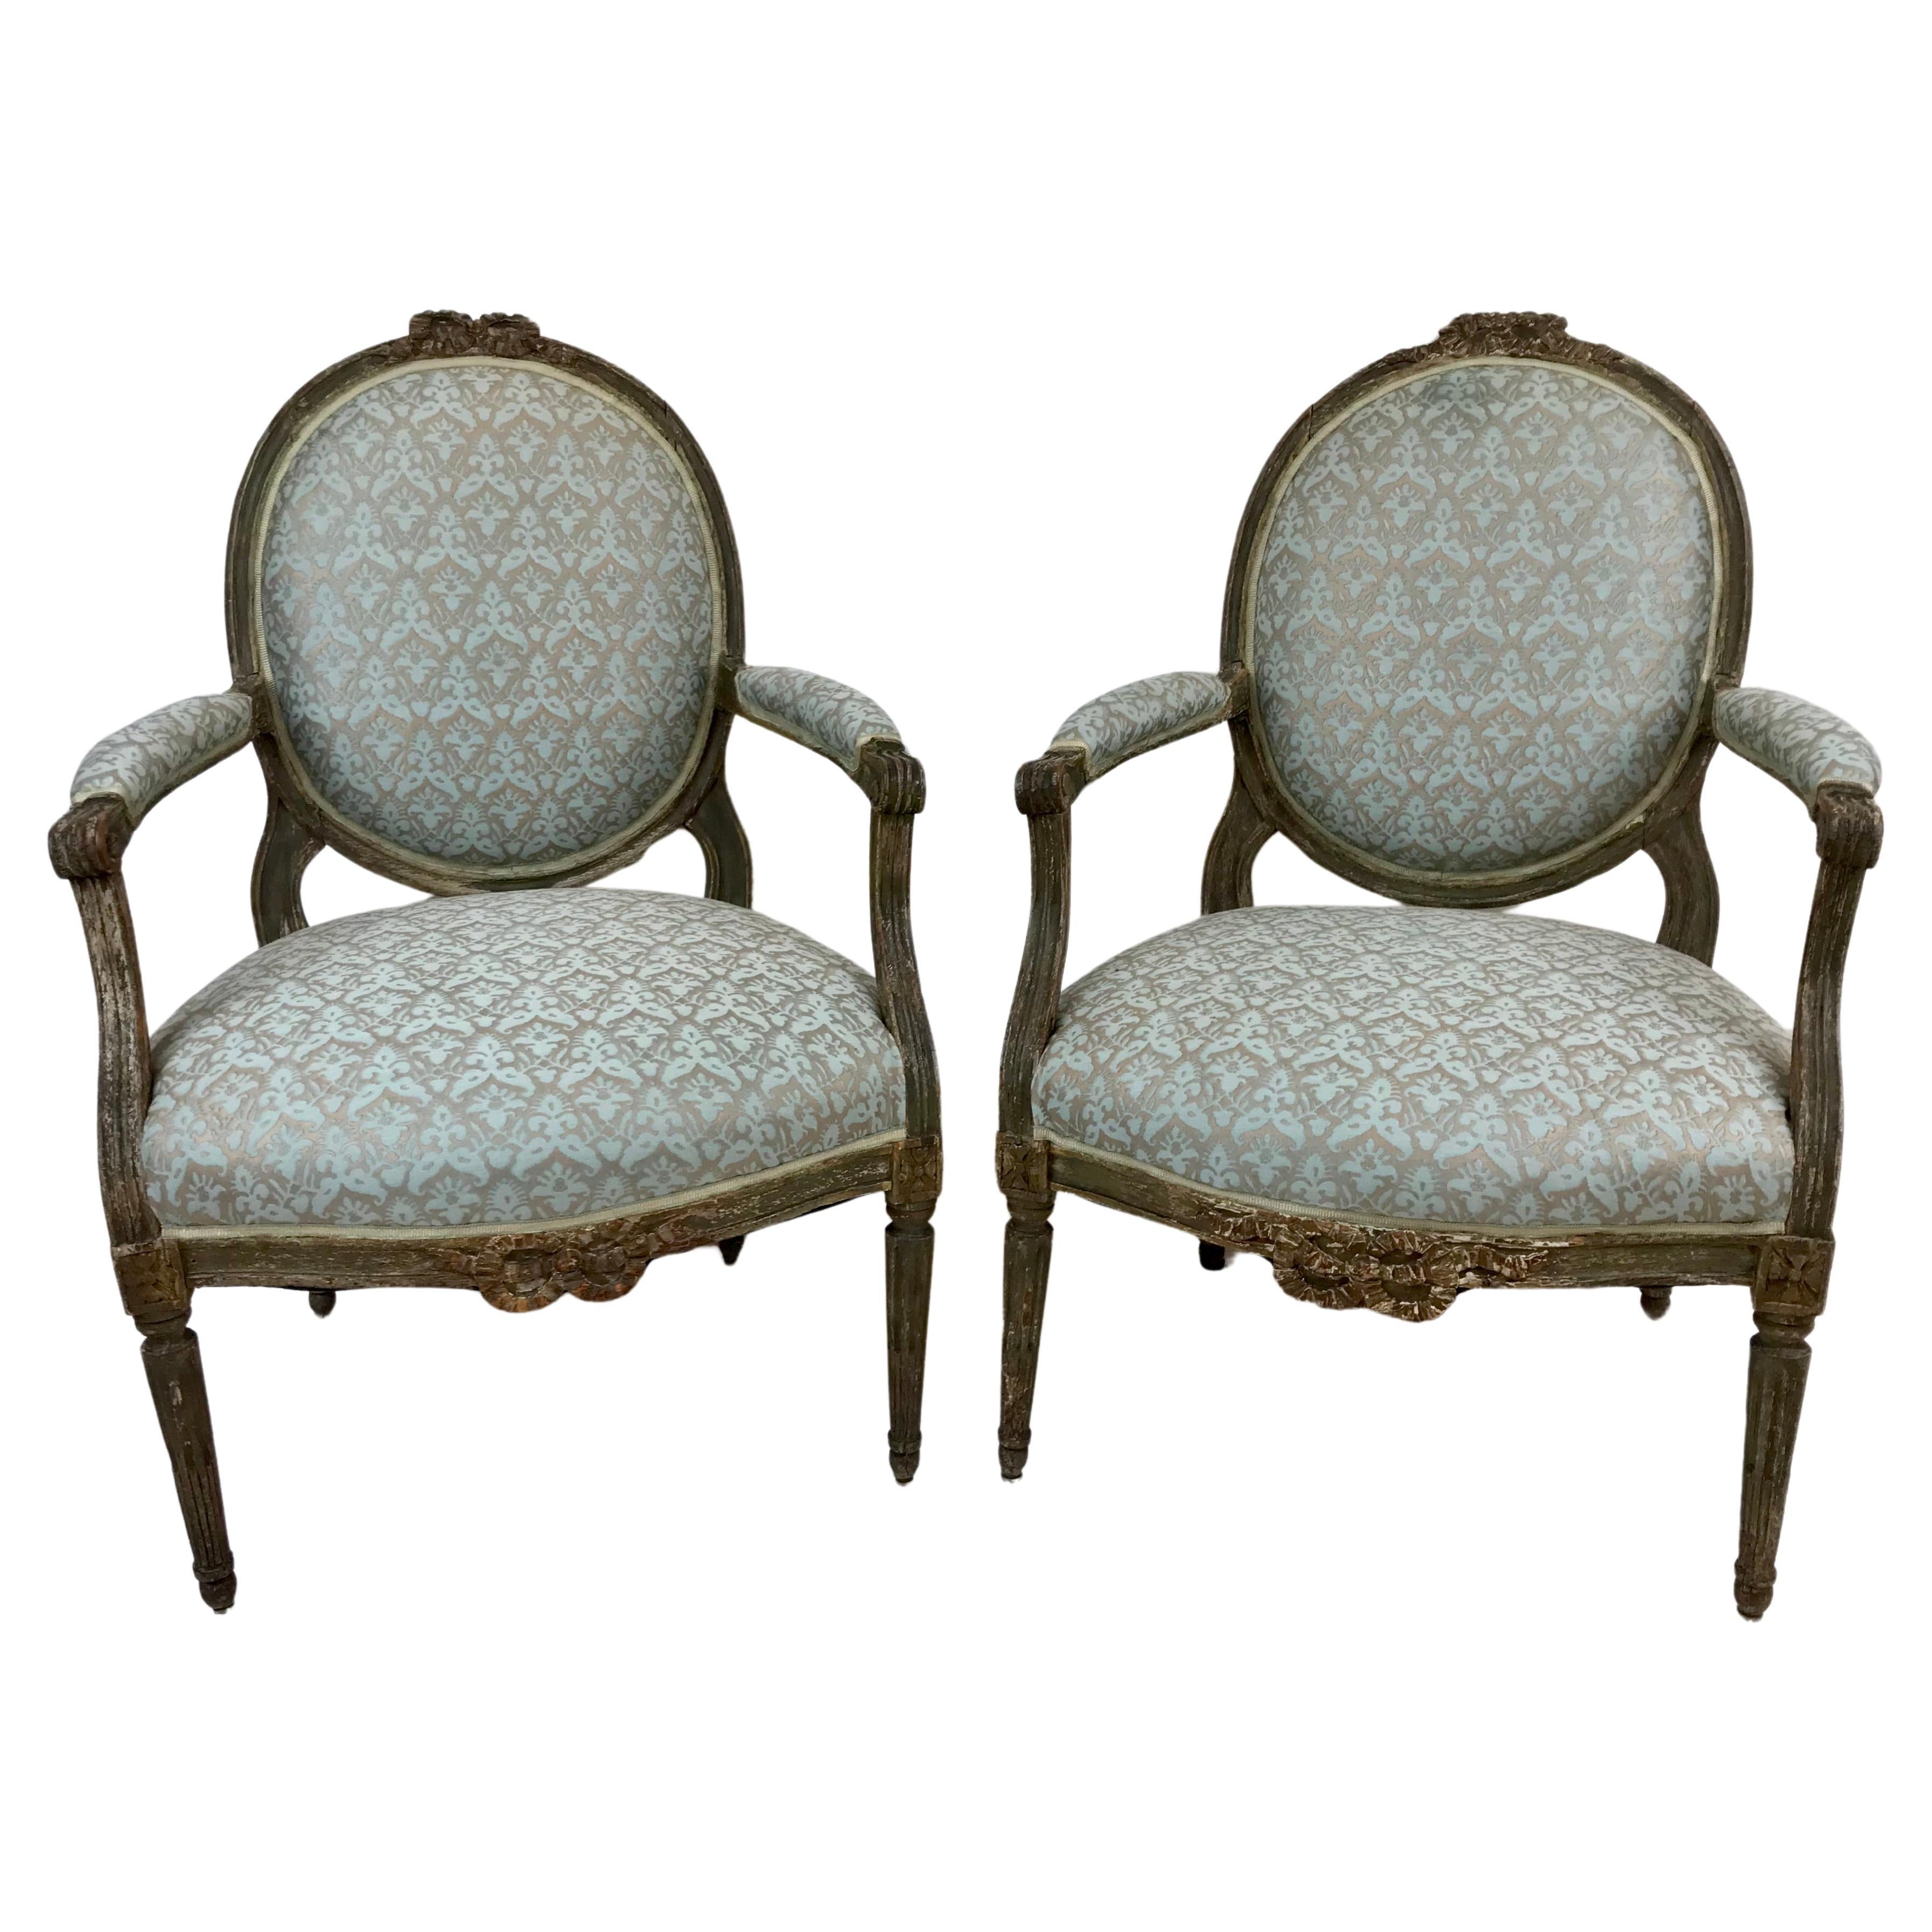 Pair Paint Decorated Louis XVI Open Arm Chairs, or Fauteuils